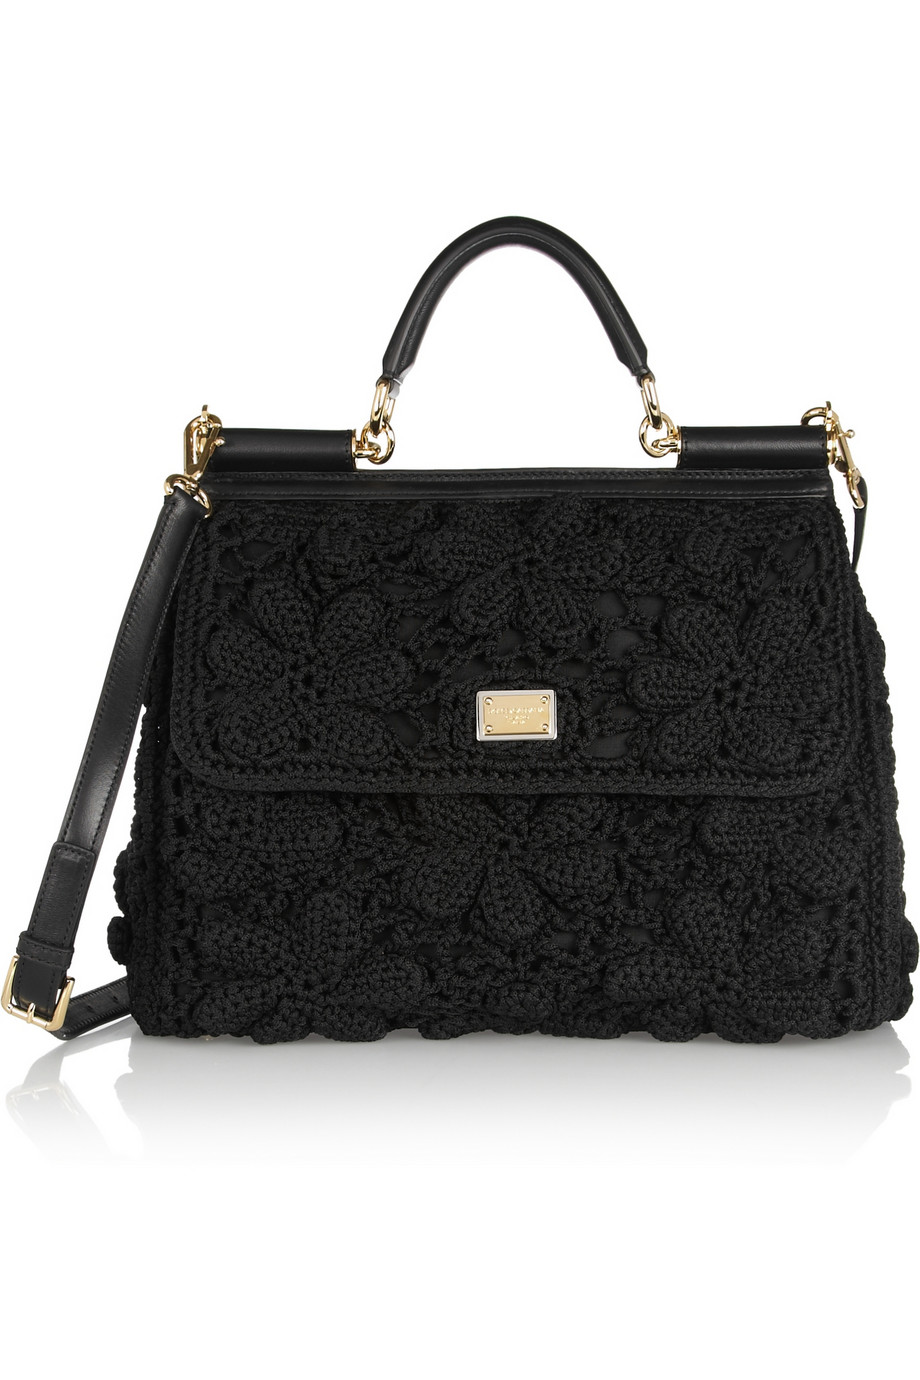 Lyst - Dolce &amp; Gabbana Miss Sicily Crochet and Leather Shoulder Bag in